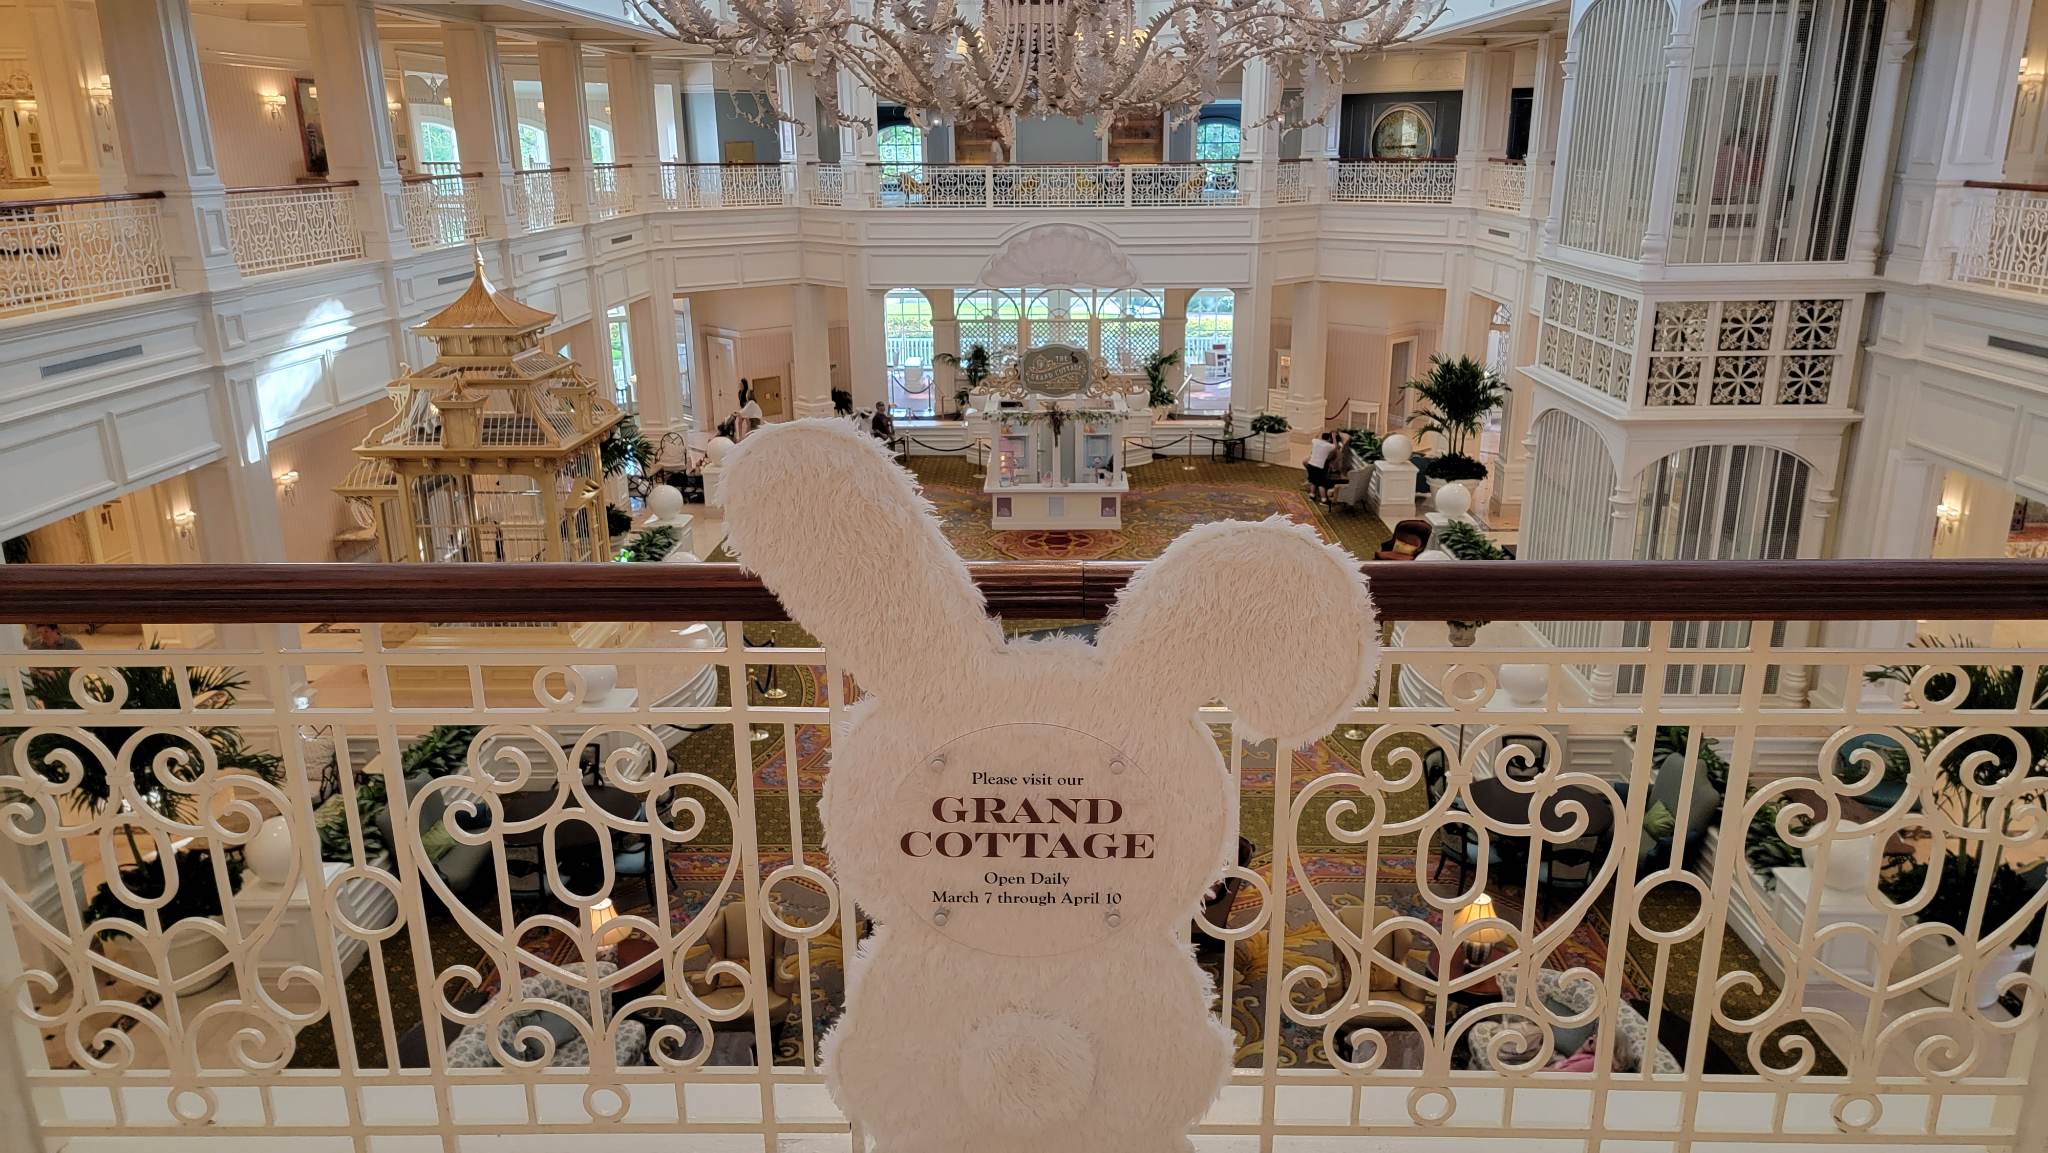 Grand Cottage returns to Disney’s Grand Floridian Resort offering Easter Treats